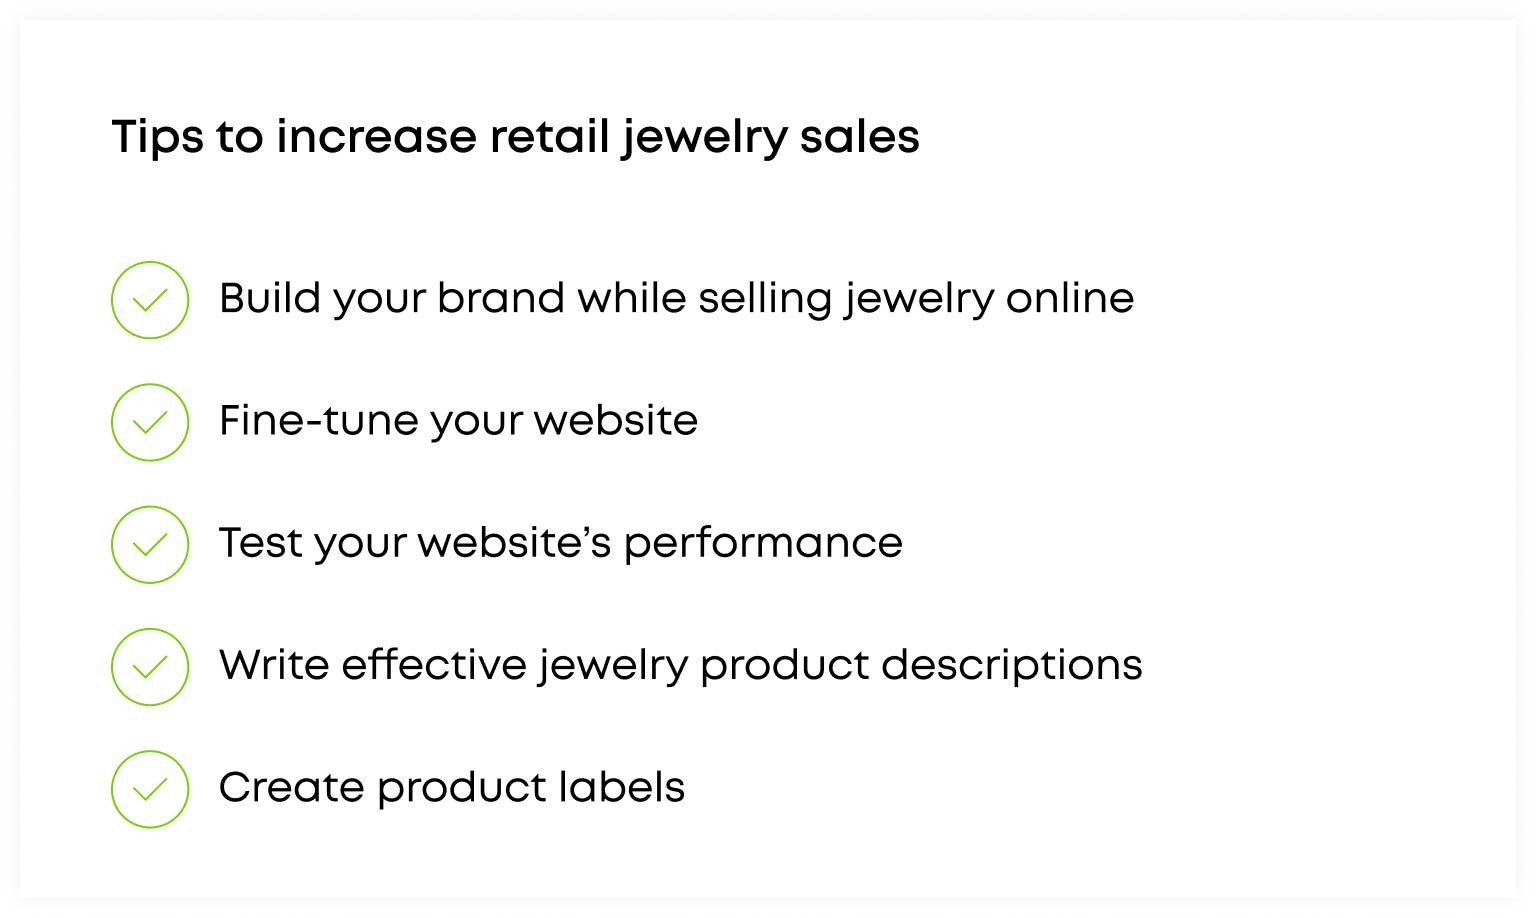 Tips to increase retail jewelry sales